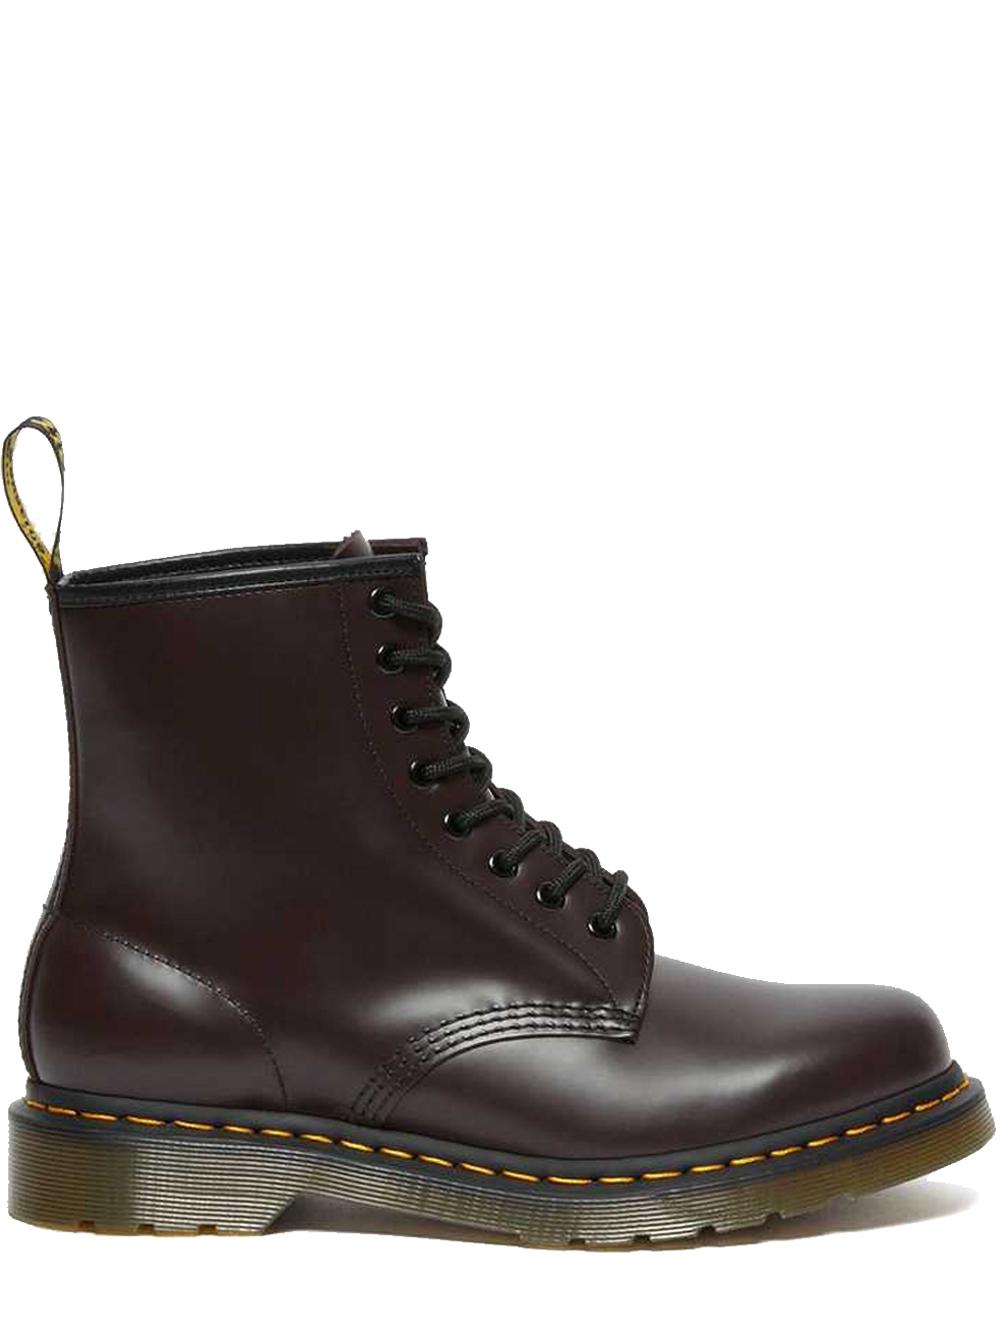 Dr. Martens 1460 Boots Burgundy In Leather in Brown | Lyst